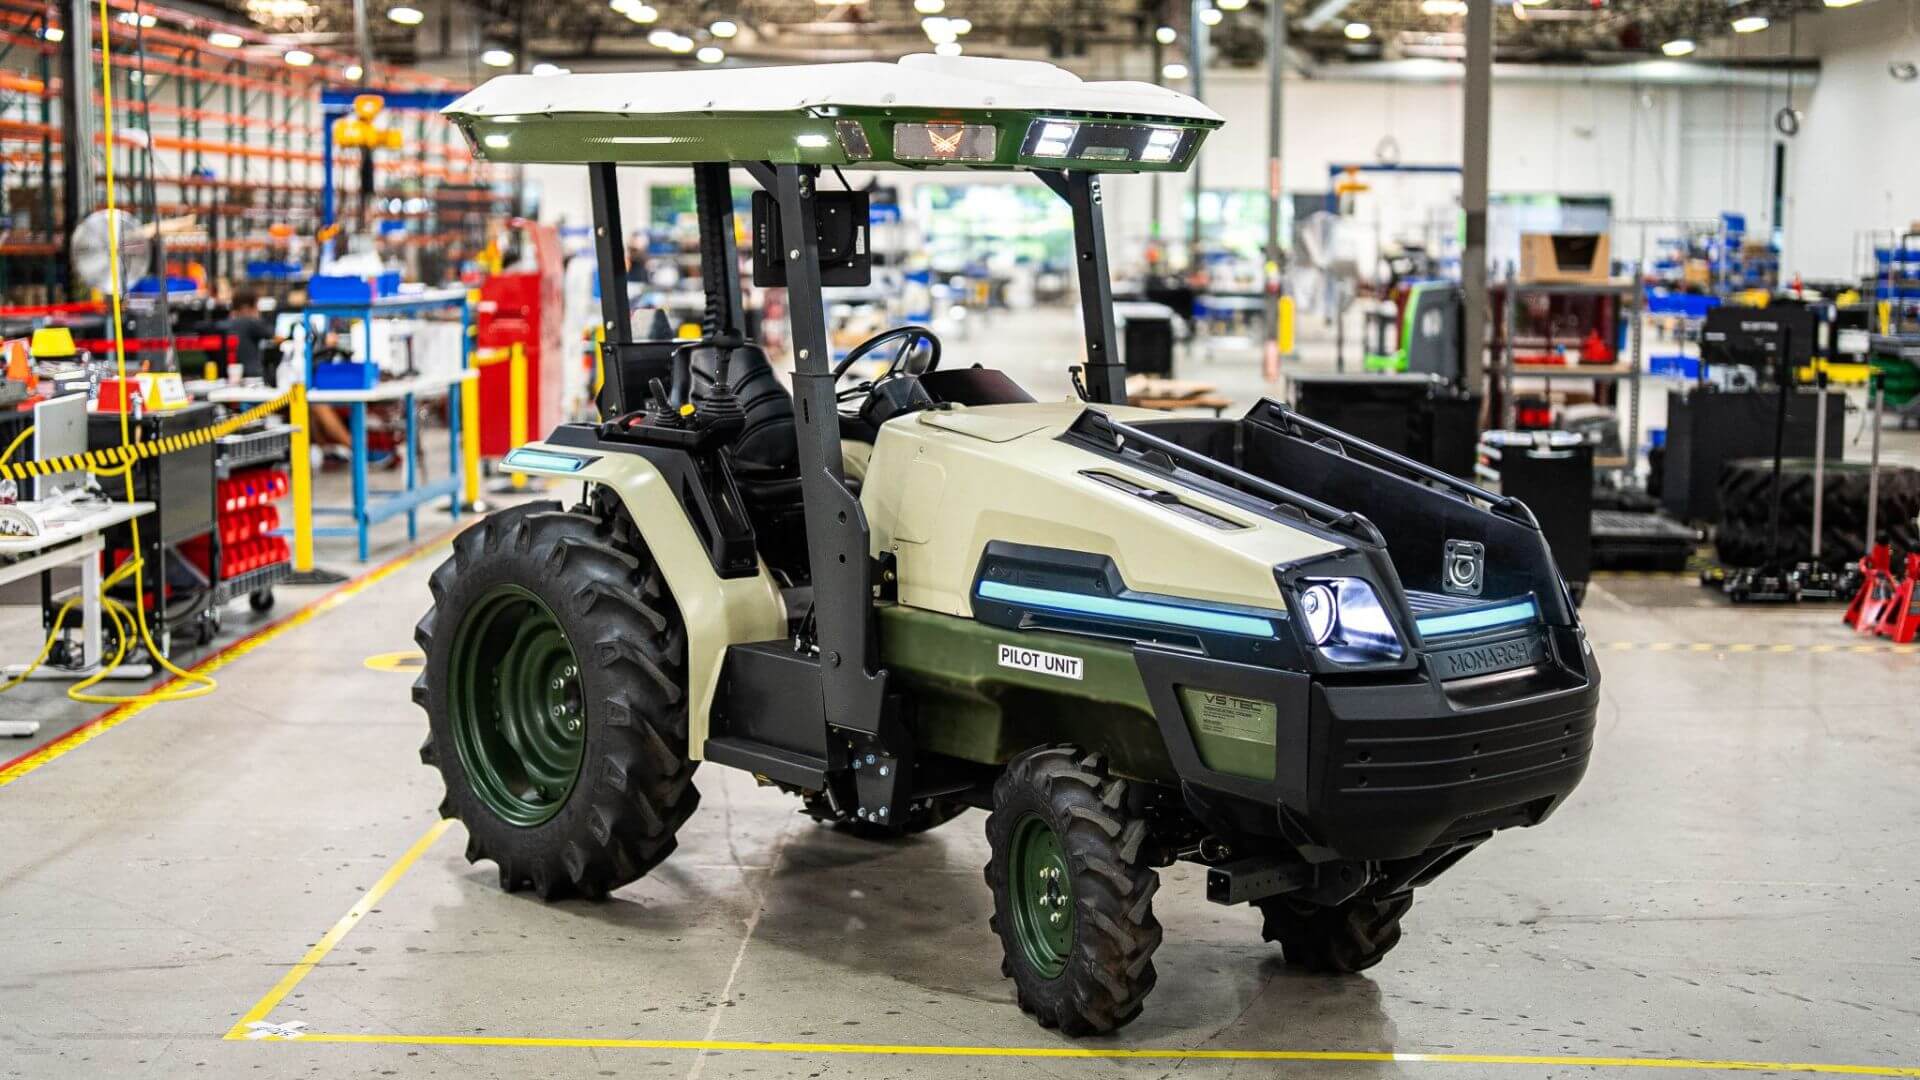 https://carandbike24.com/monarch-tractor-to-produce-mk-v-series-foxconn-joined/